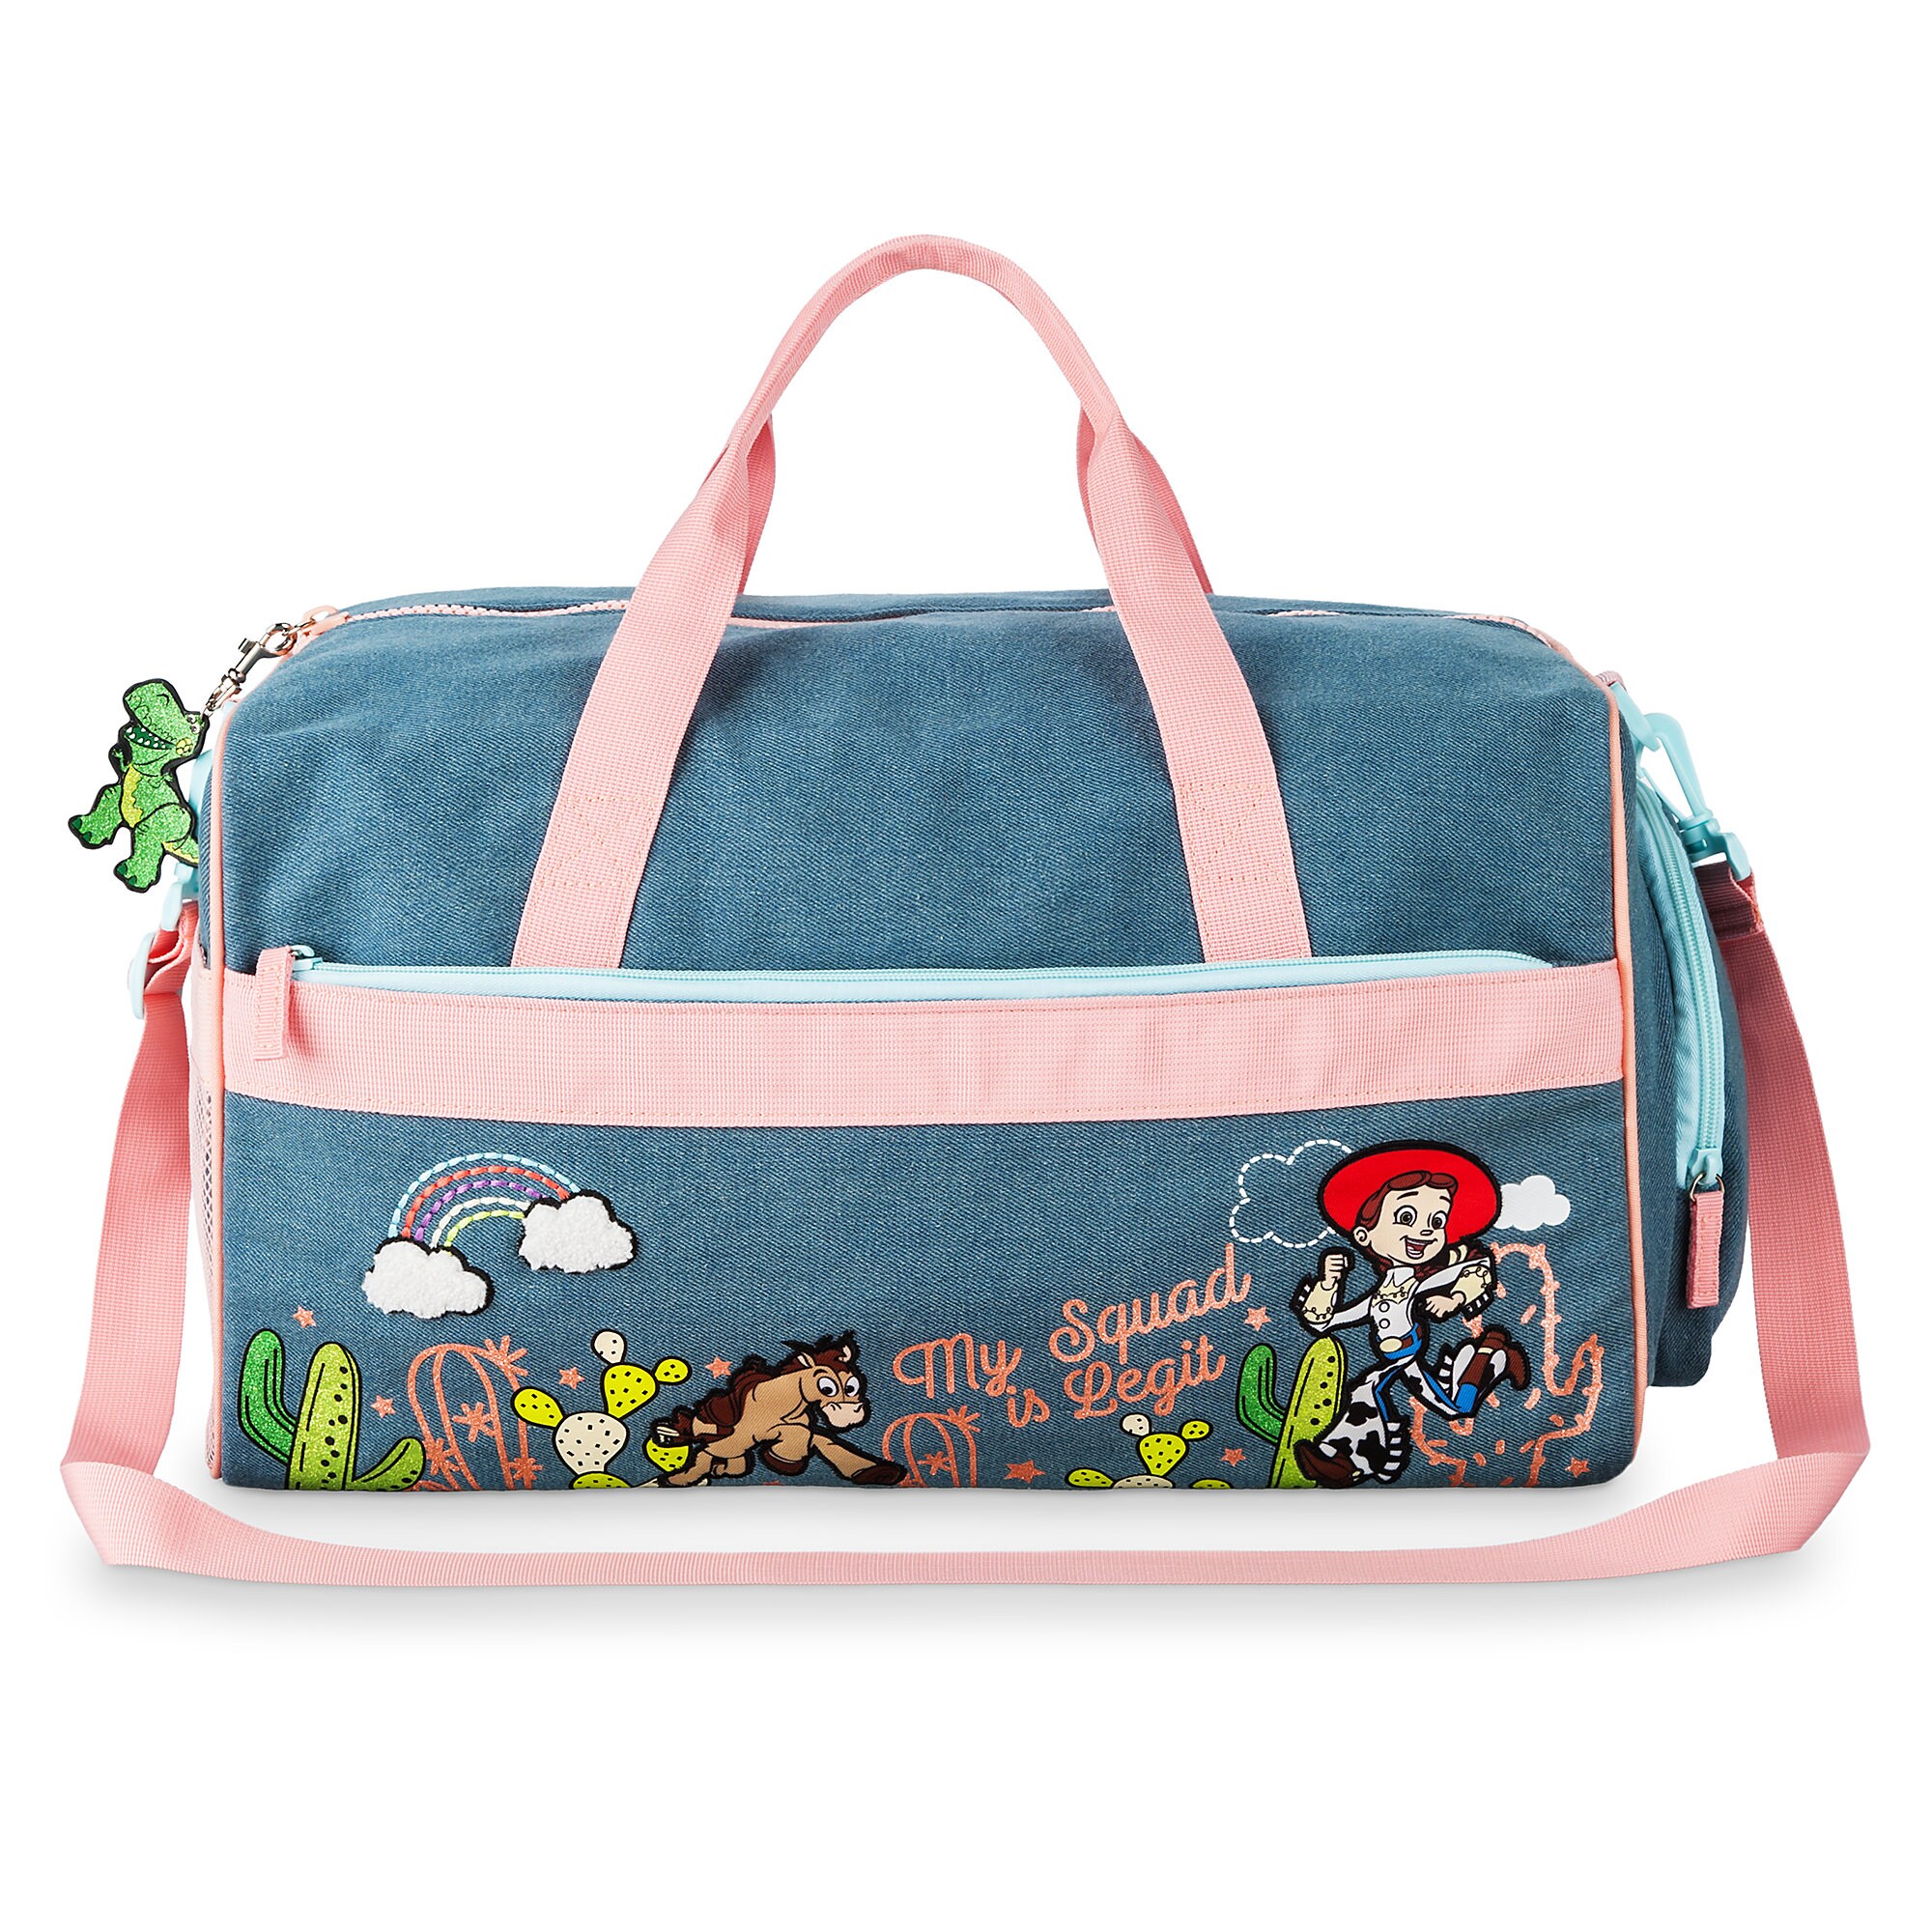 Toy Story Duffle Bag